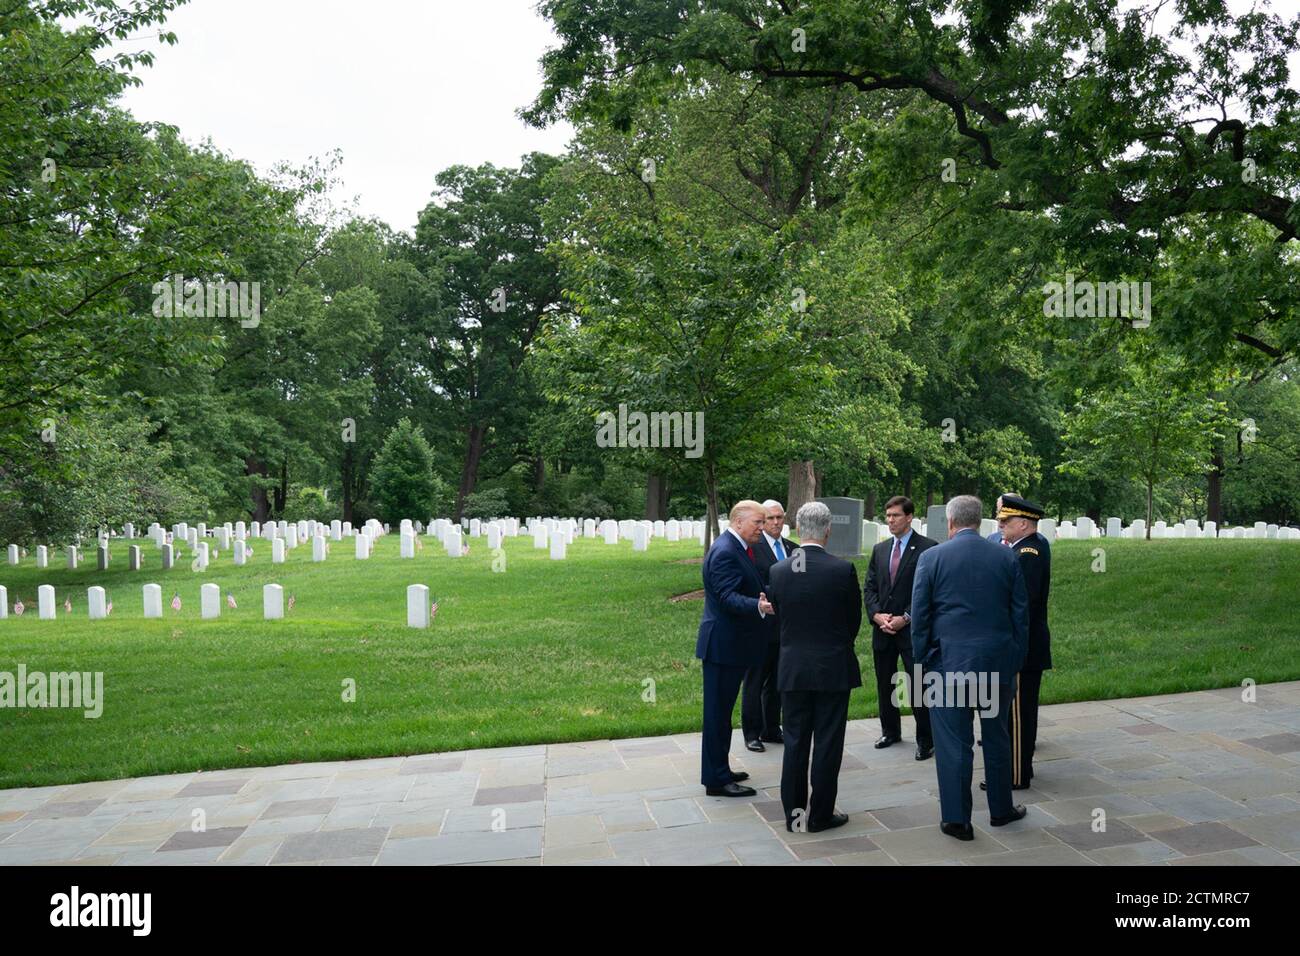 Memorial Day 2020. President Donald J. Trump, Vice President Mike Pence meet with Secretary of Defense Mark Esper,  U.S. military leaders and White House senior staff while attending the Memorial Day wreath-laying ceremony at the Tomb of the Unknown Soldier at Arlington National Cemetery Monday, May 25, 2020, in Arlington, Va. Stock Photo